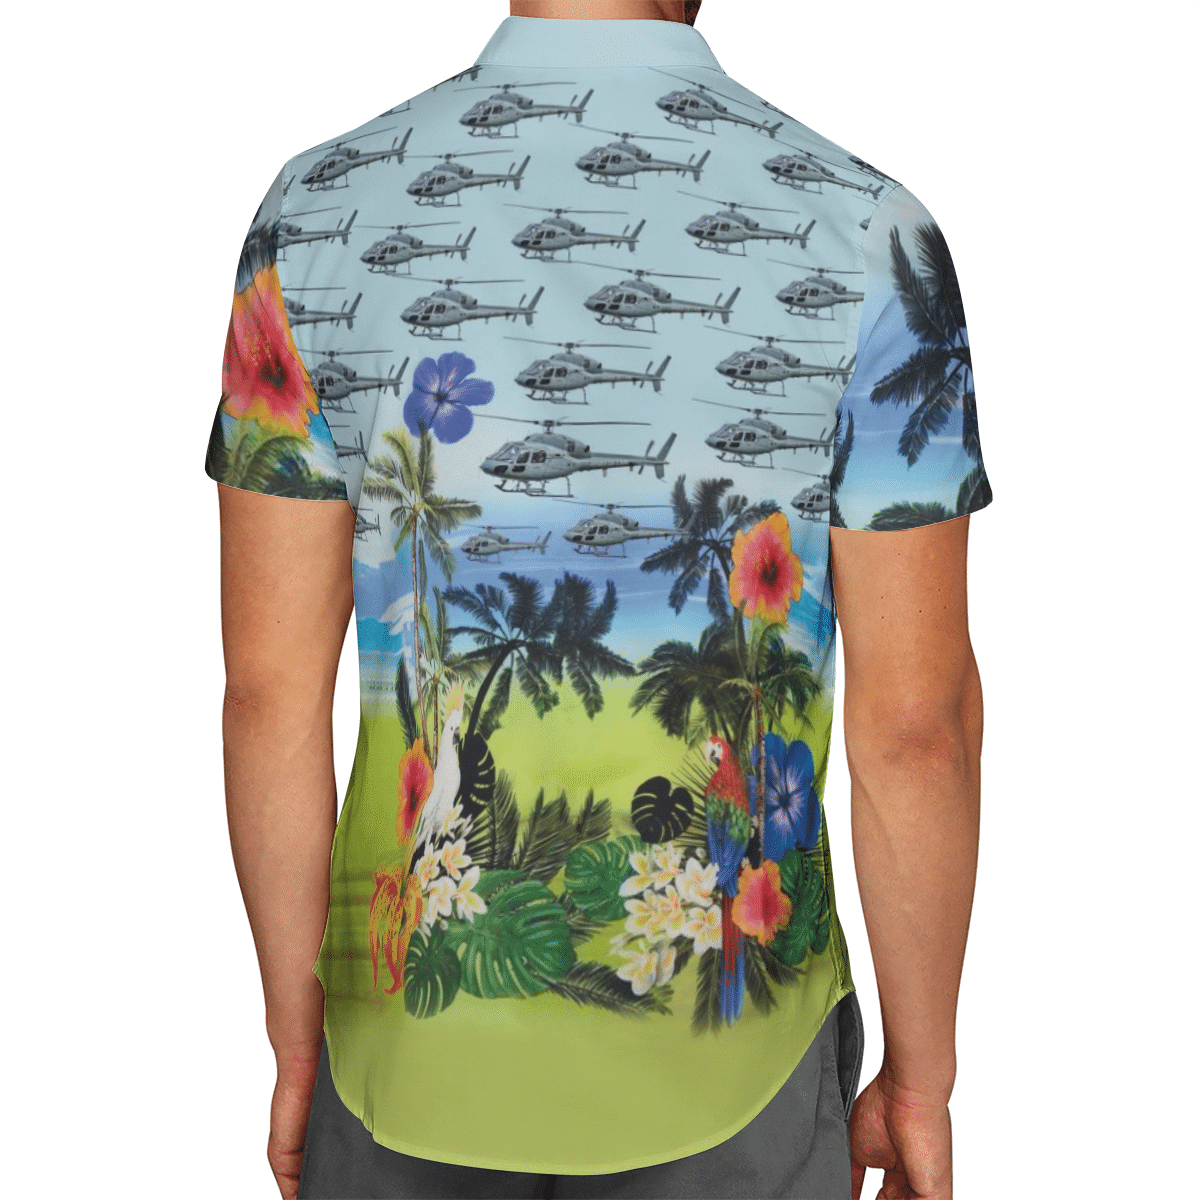 Going to the beach with a quality shirt 196